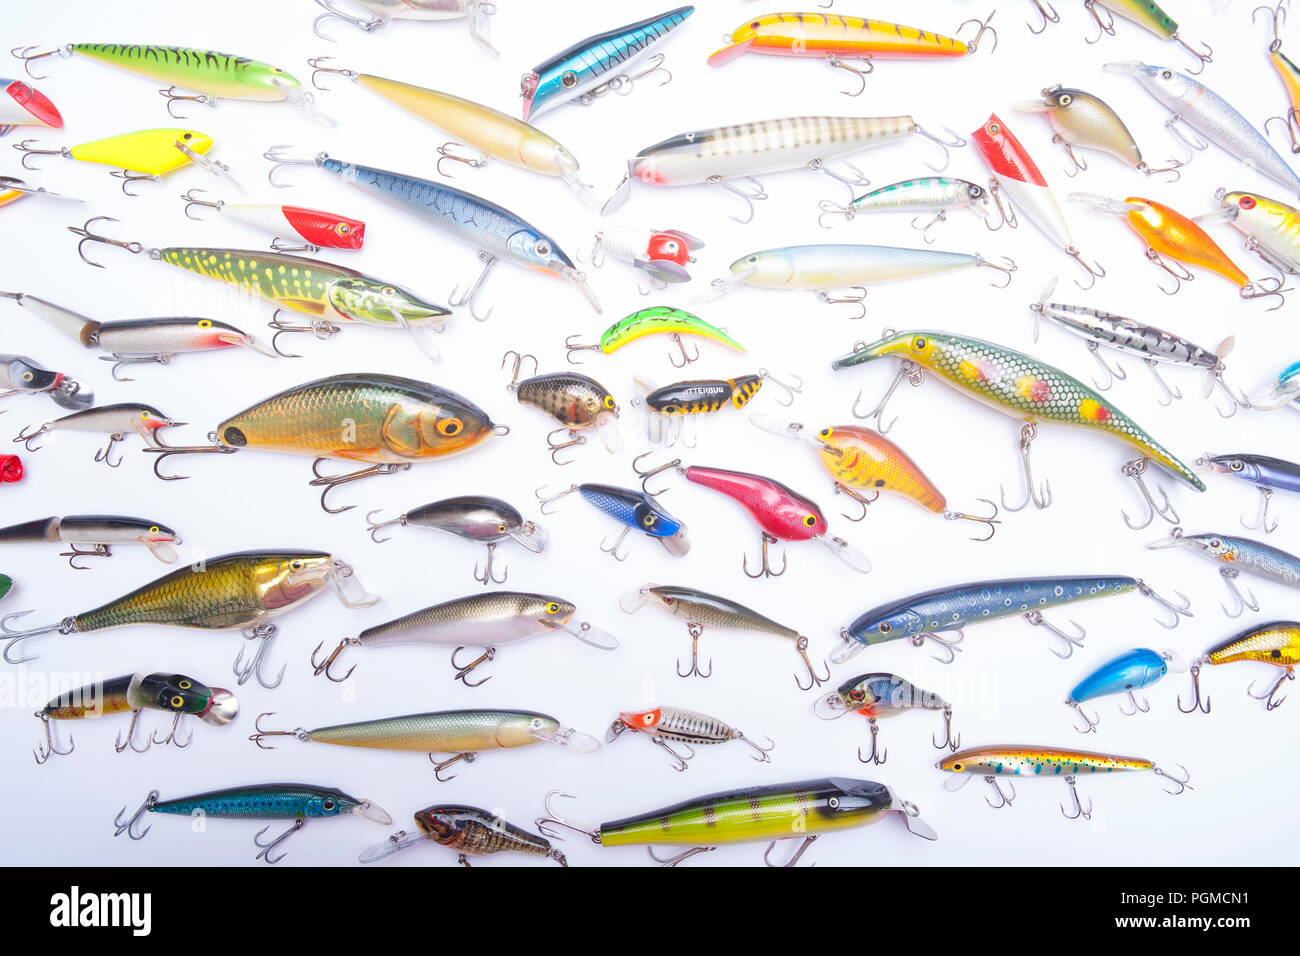 A selection of mostly modern fishing lures, also known as plugs